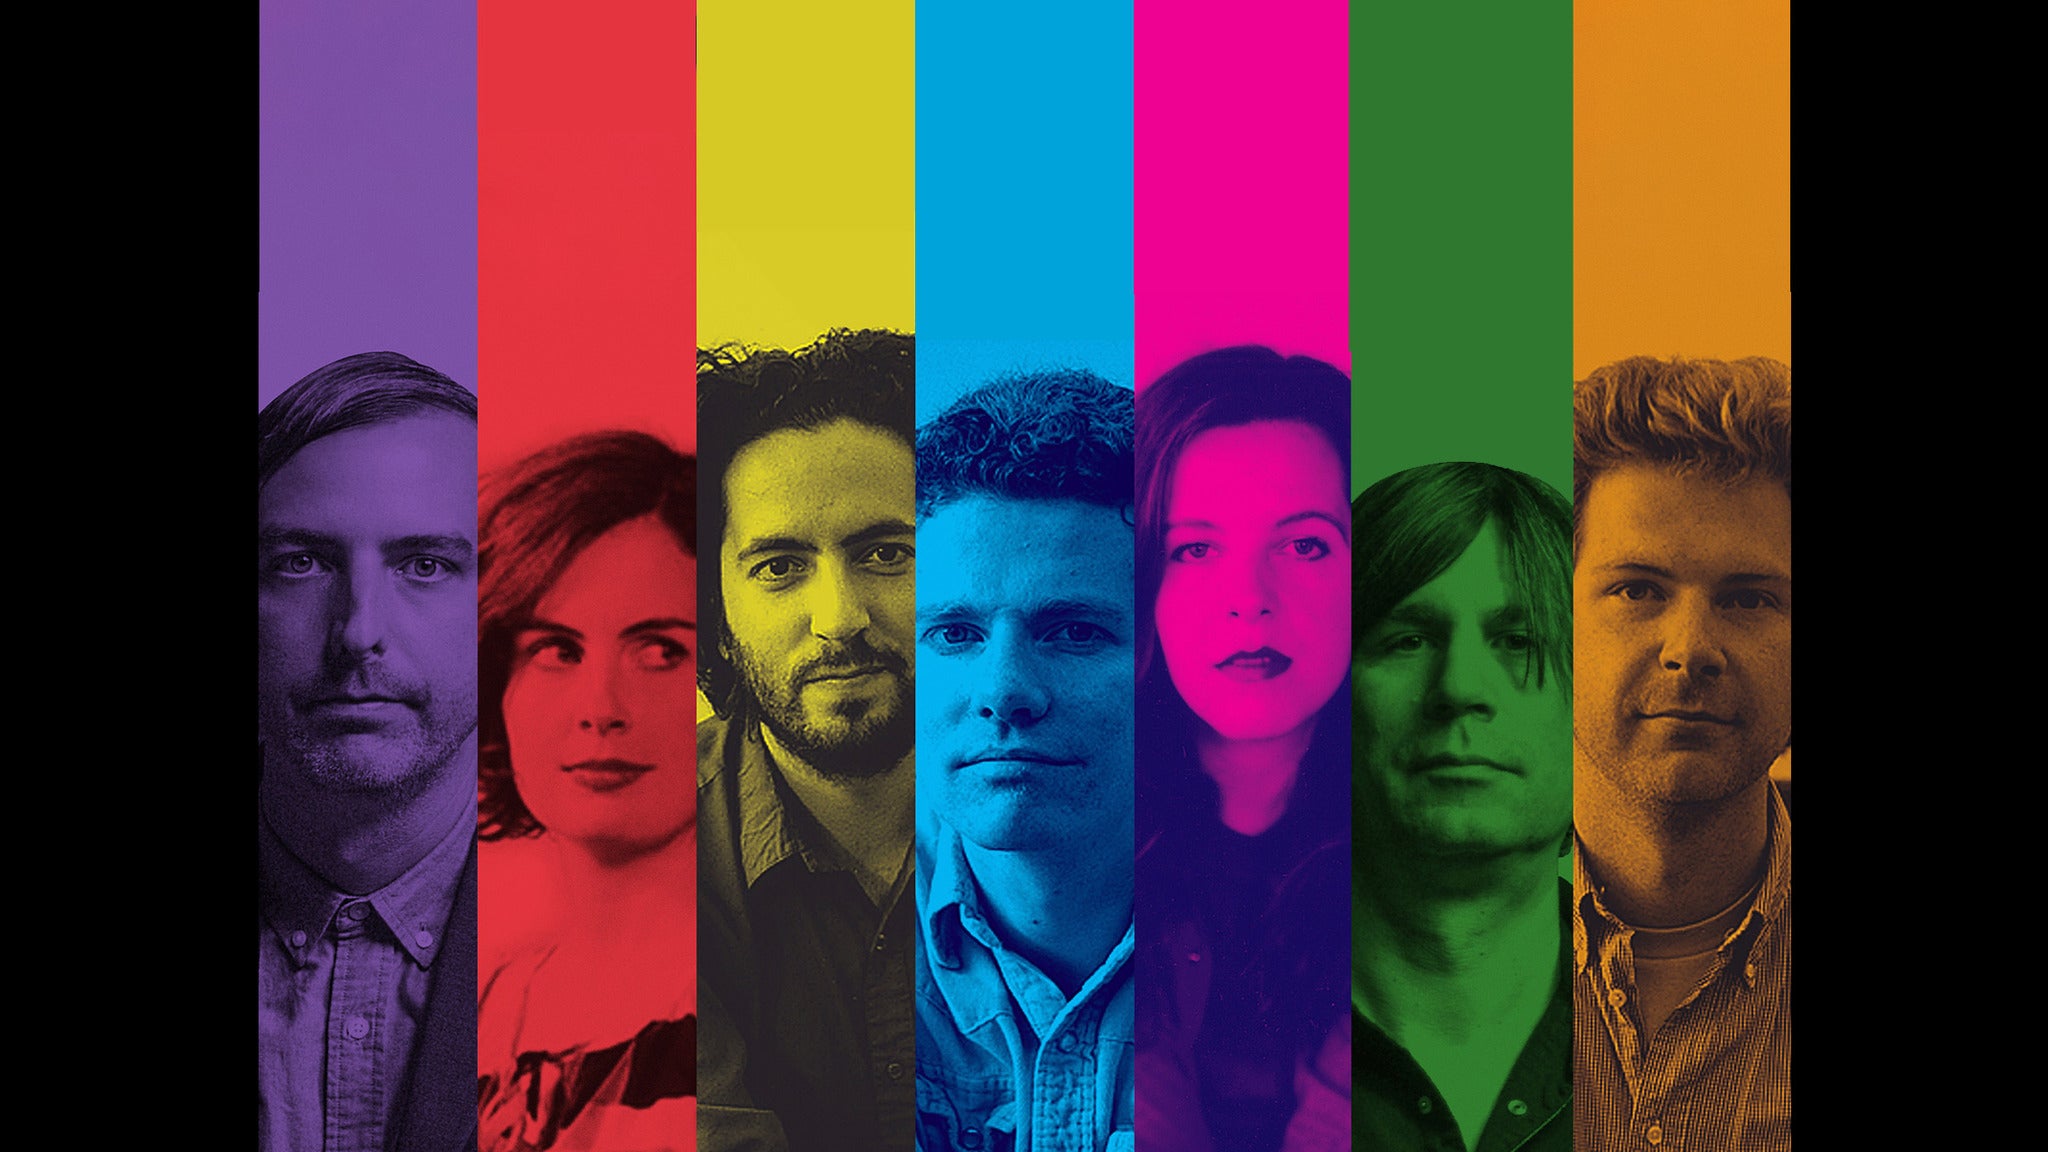 The New Pornographers - Performing the album 'Mass Romantic' in Los Angeles promo photo for Artist presale offer code